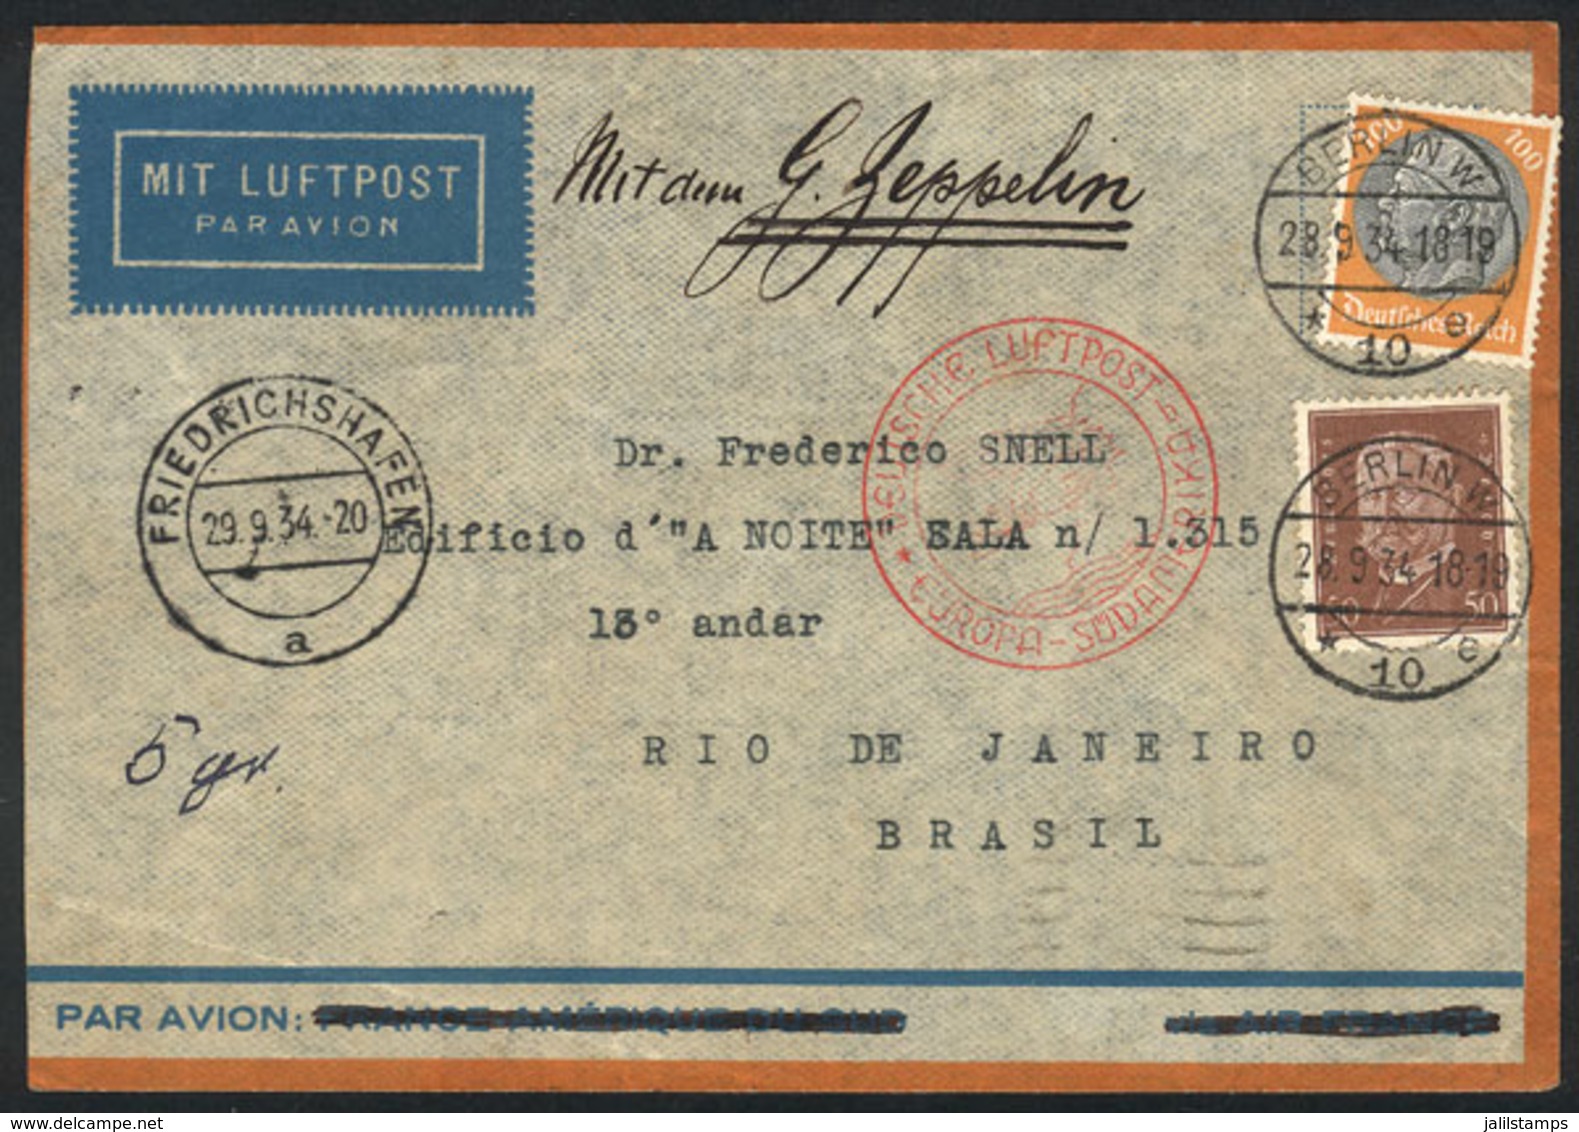 GERMANY: Cover Flown By ZEPPELIN, Sent From Berlin To Rio De Janeiro On 28/SE/1934, With Friedrichshafen Transit Mark Of - Covers & Documents